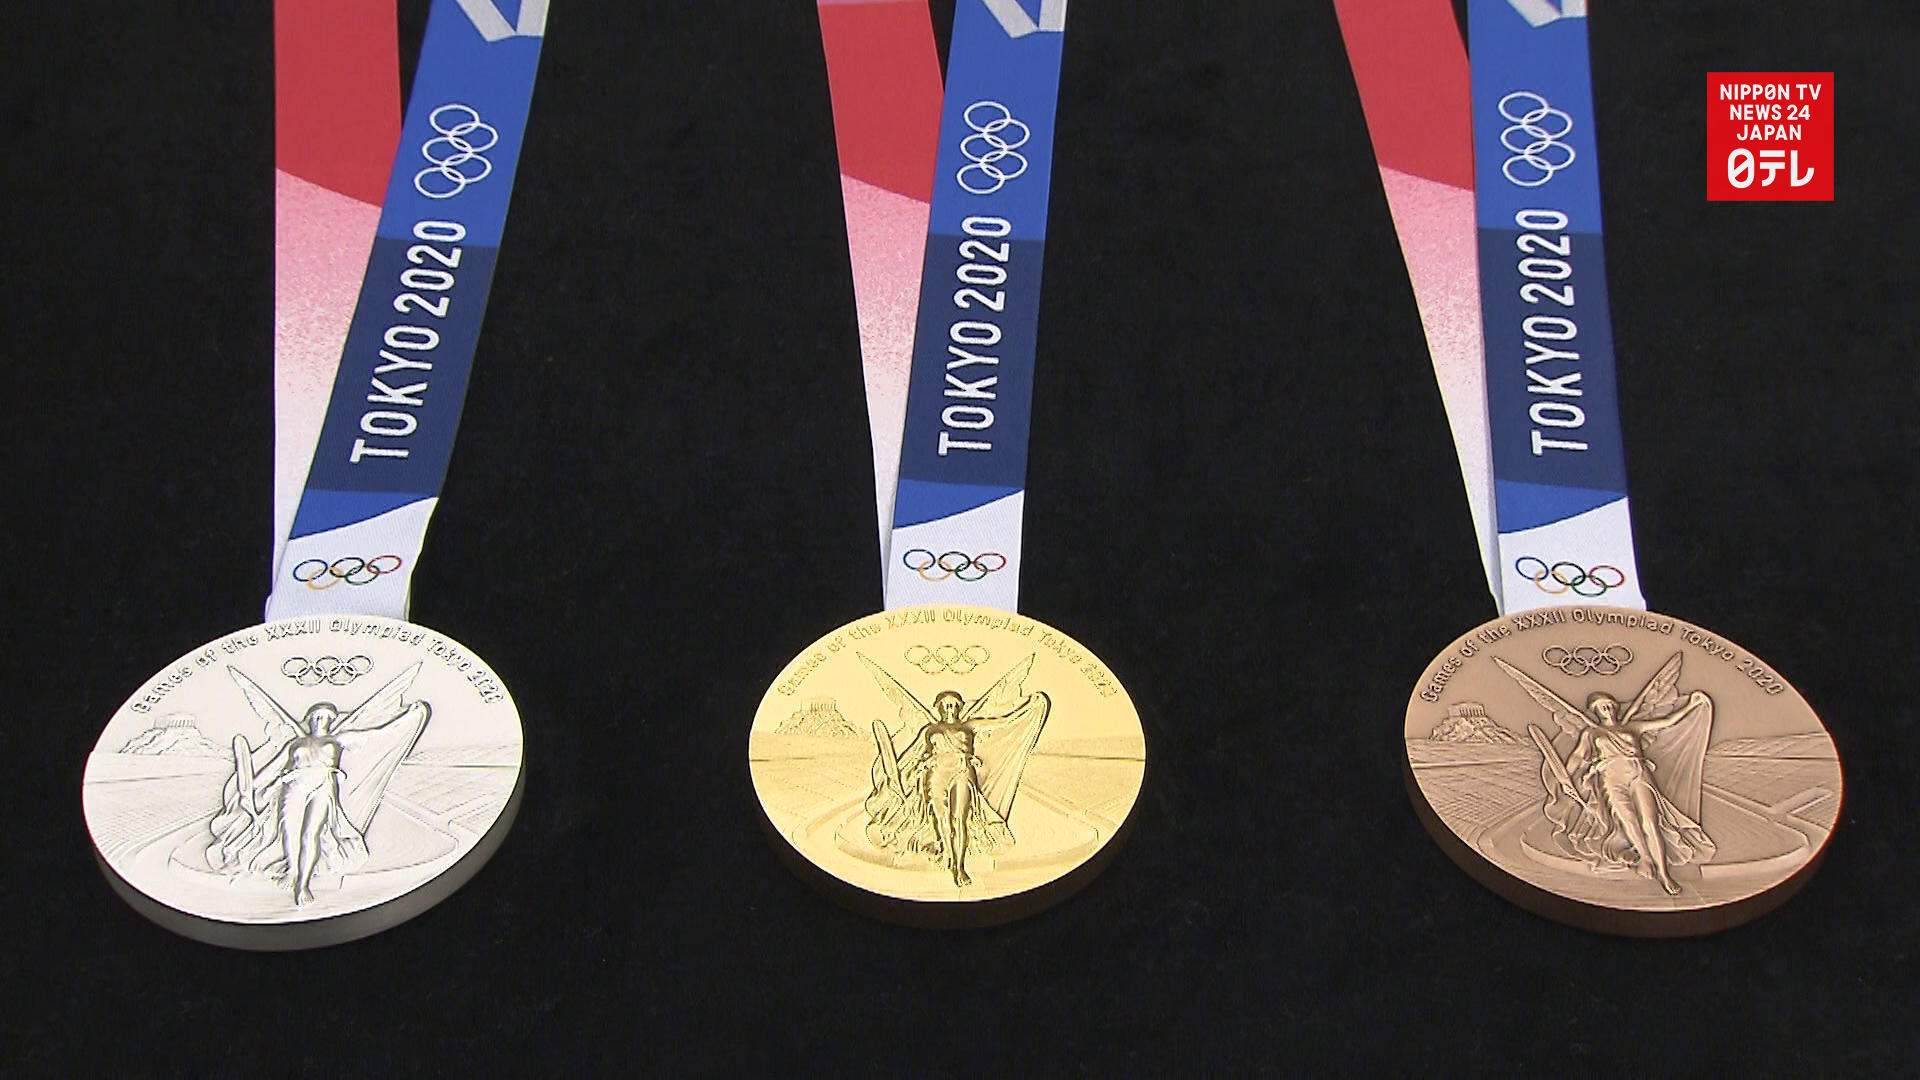 Tokyo Olympic medals, countdown clock unveiled